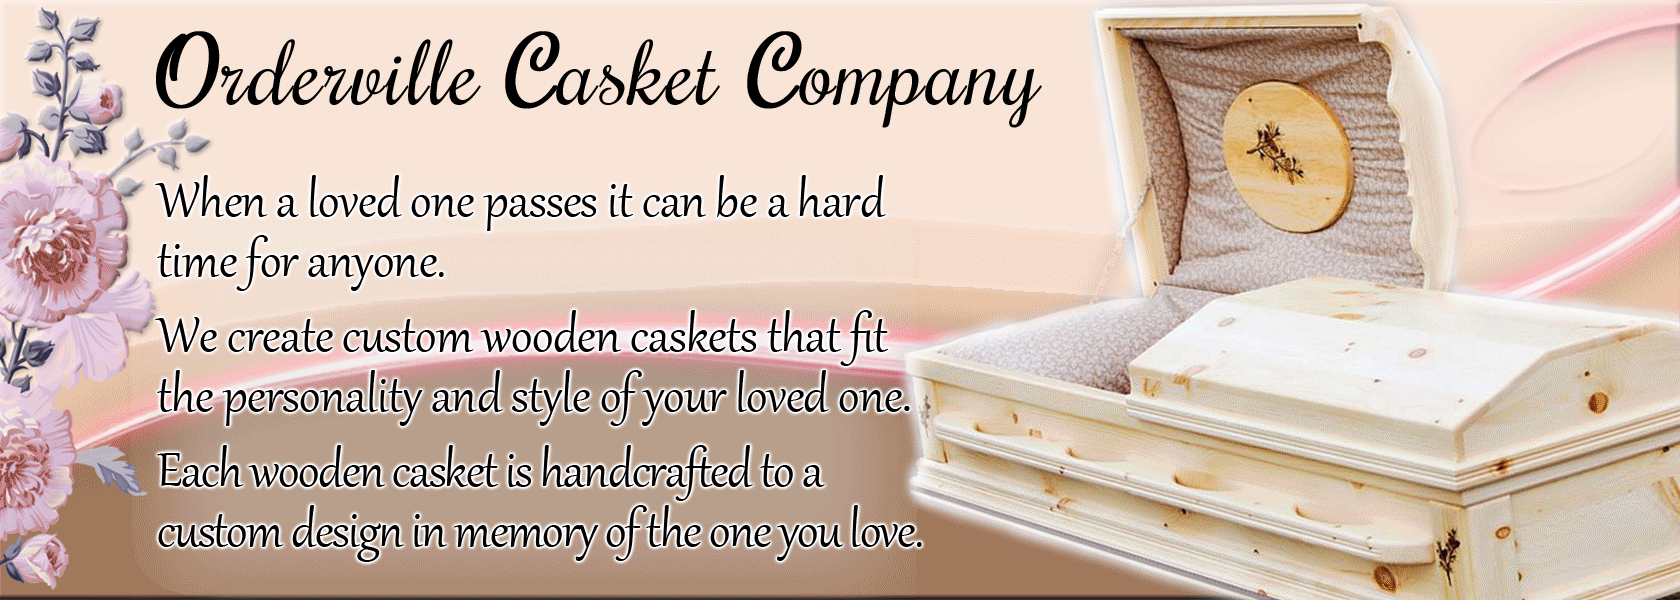 Orderville Casket Company. When a loved one passes it can be a hard time for anyone.  We create custom wooden caskets that fit the personality and style of your loved one. Each wooden casket is handcrafted  to a custom design in memory of the one you love.